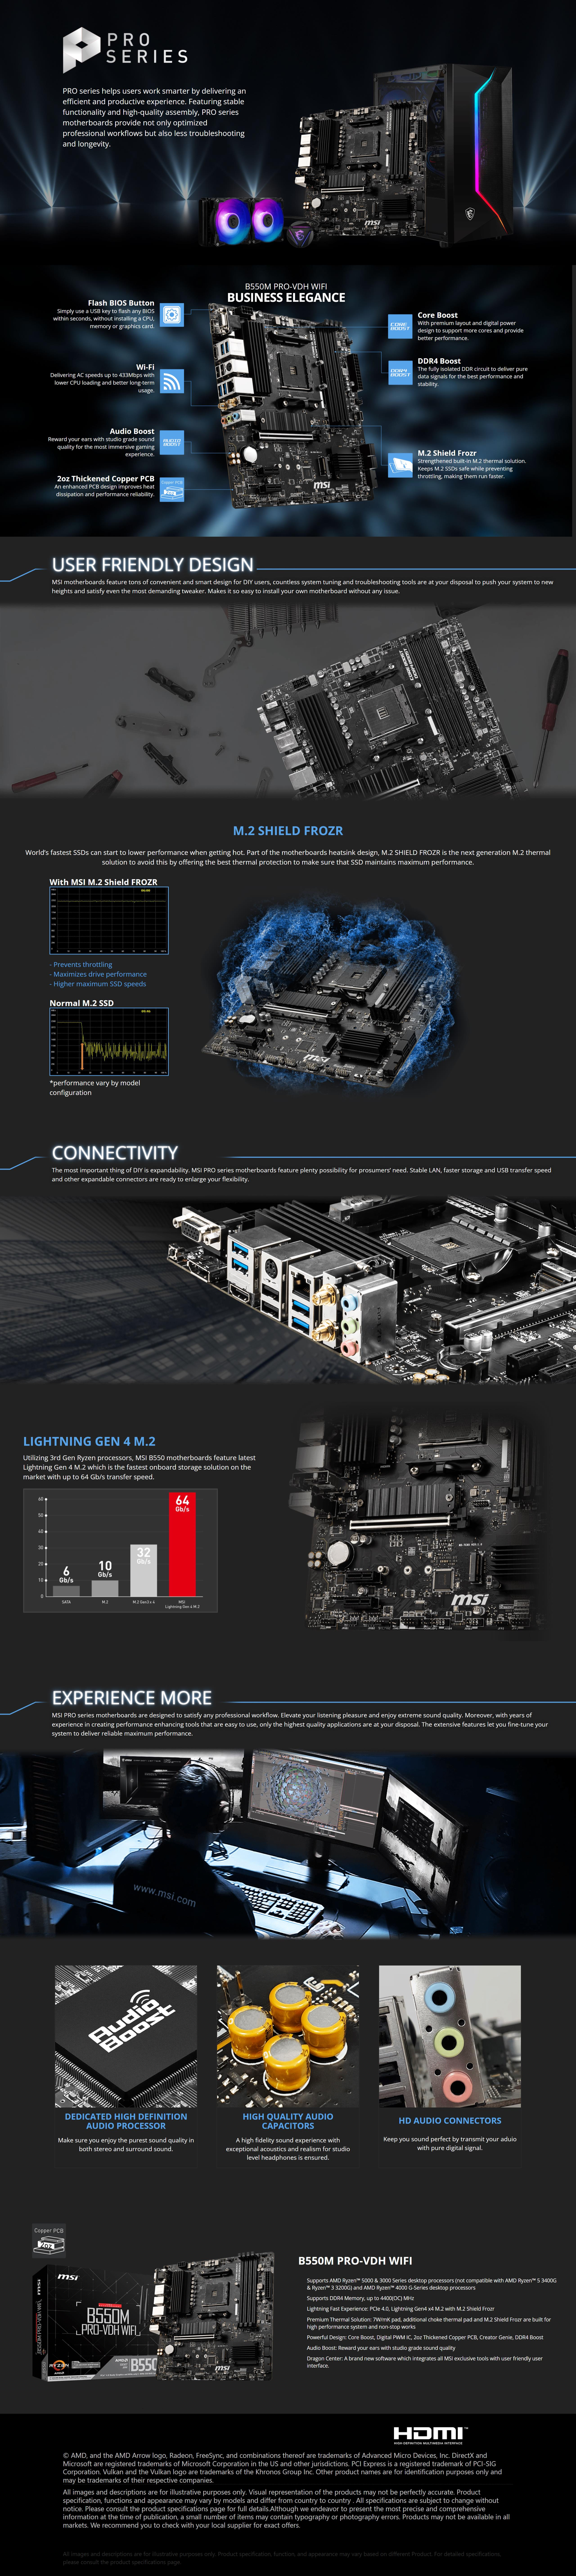 A large marketing image providing additional information about the product MSI B550M PRO-VDH WiFi AM4 mATX Desktop Motherboard - Additional alt info not provided